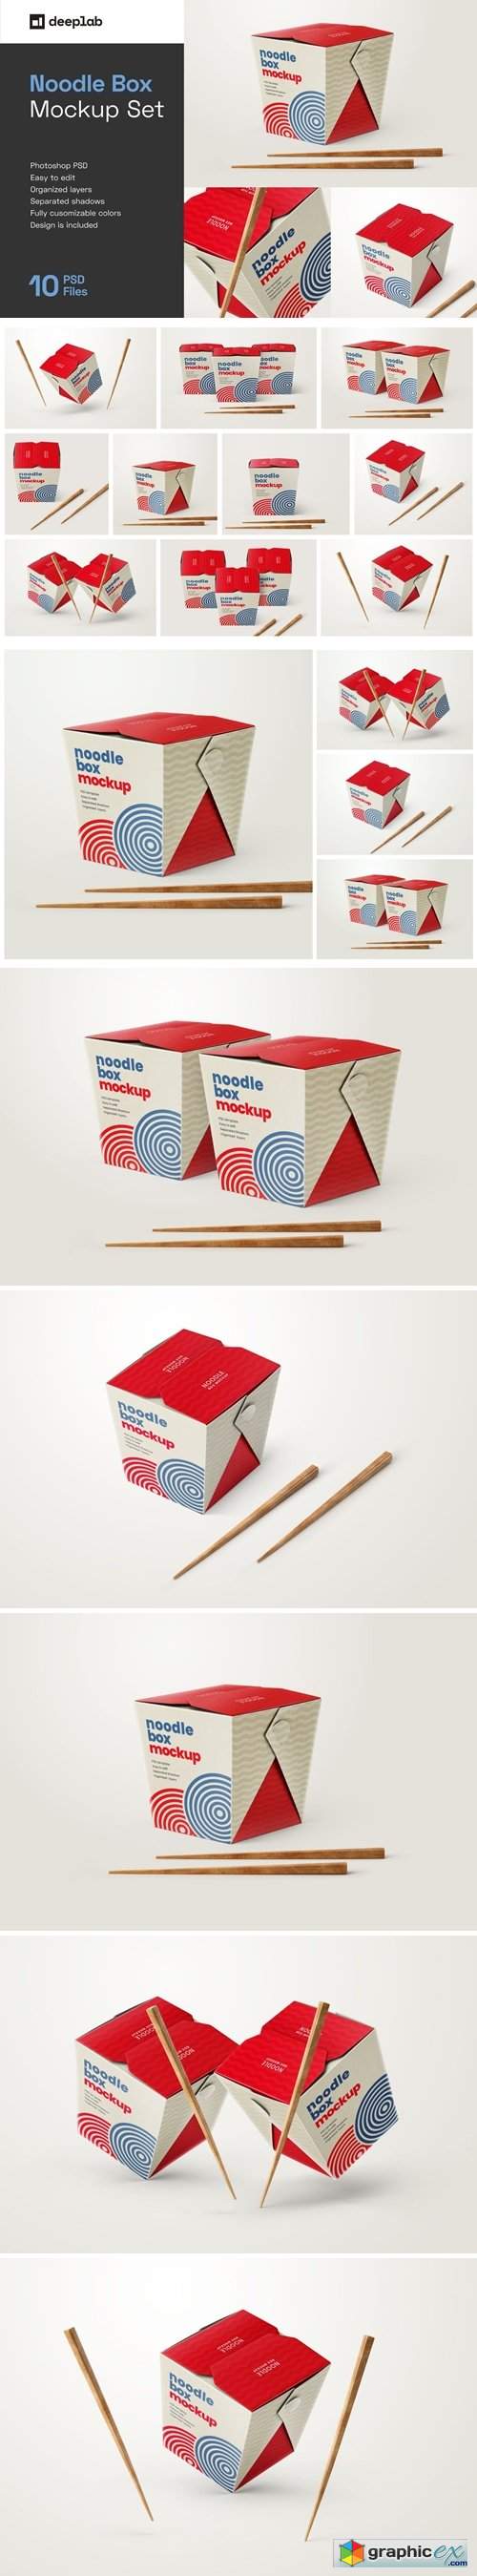 Download Noodle Box Mockup Set Asian Food Free Download Vector Stock Image Photoshop Icon